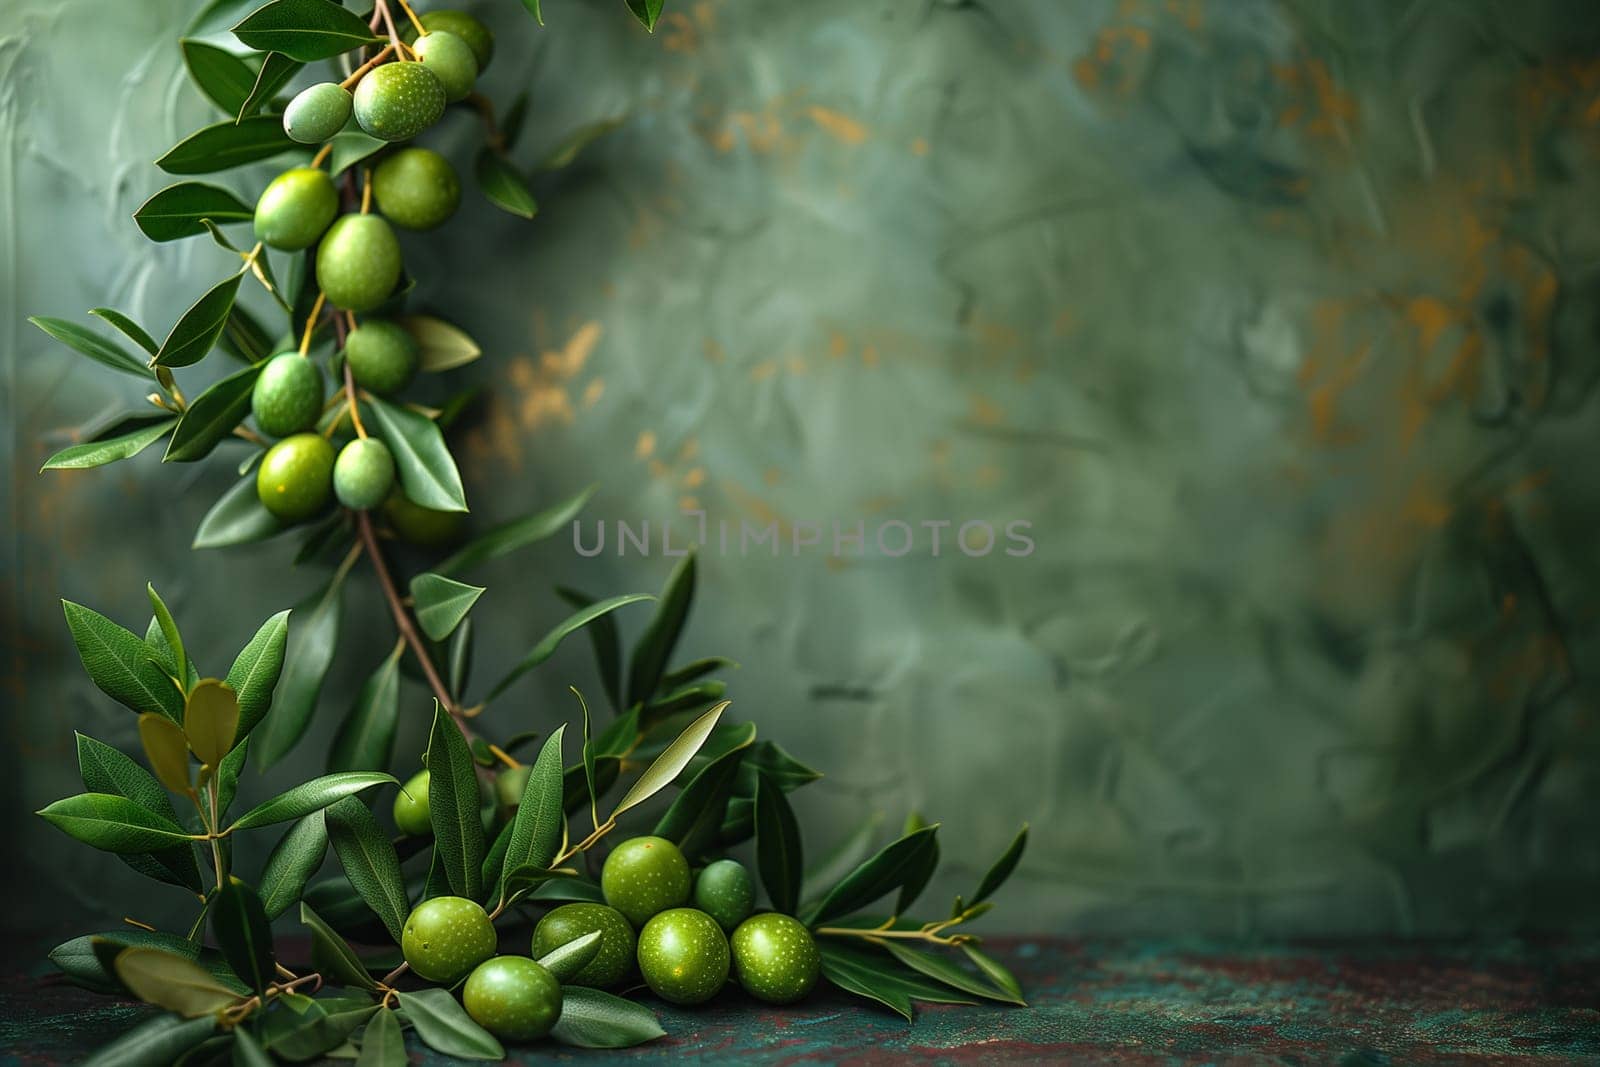 A branch heavy with ripe green olives is lying on a rustic surface, leaves interspersed among the fruit, with a soft-focus backdrop suggesting a tranquil setting.